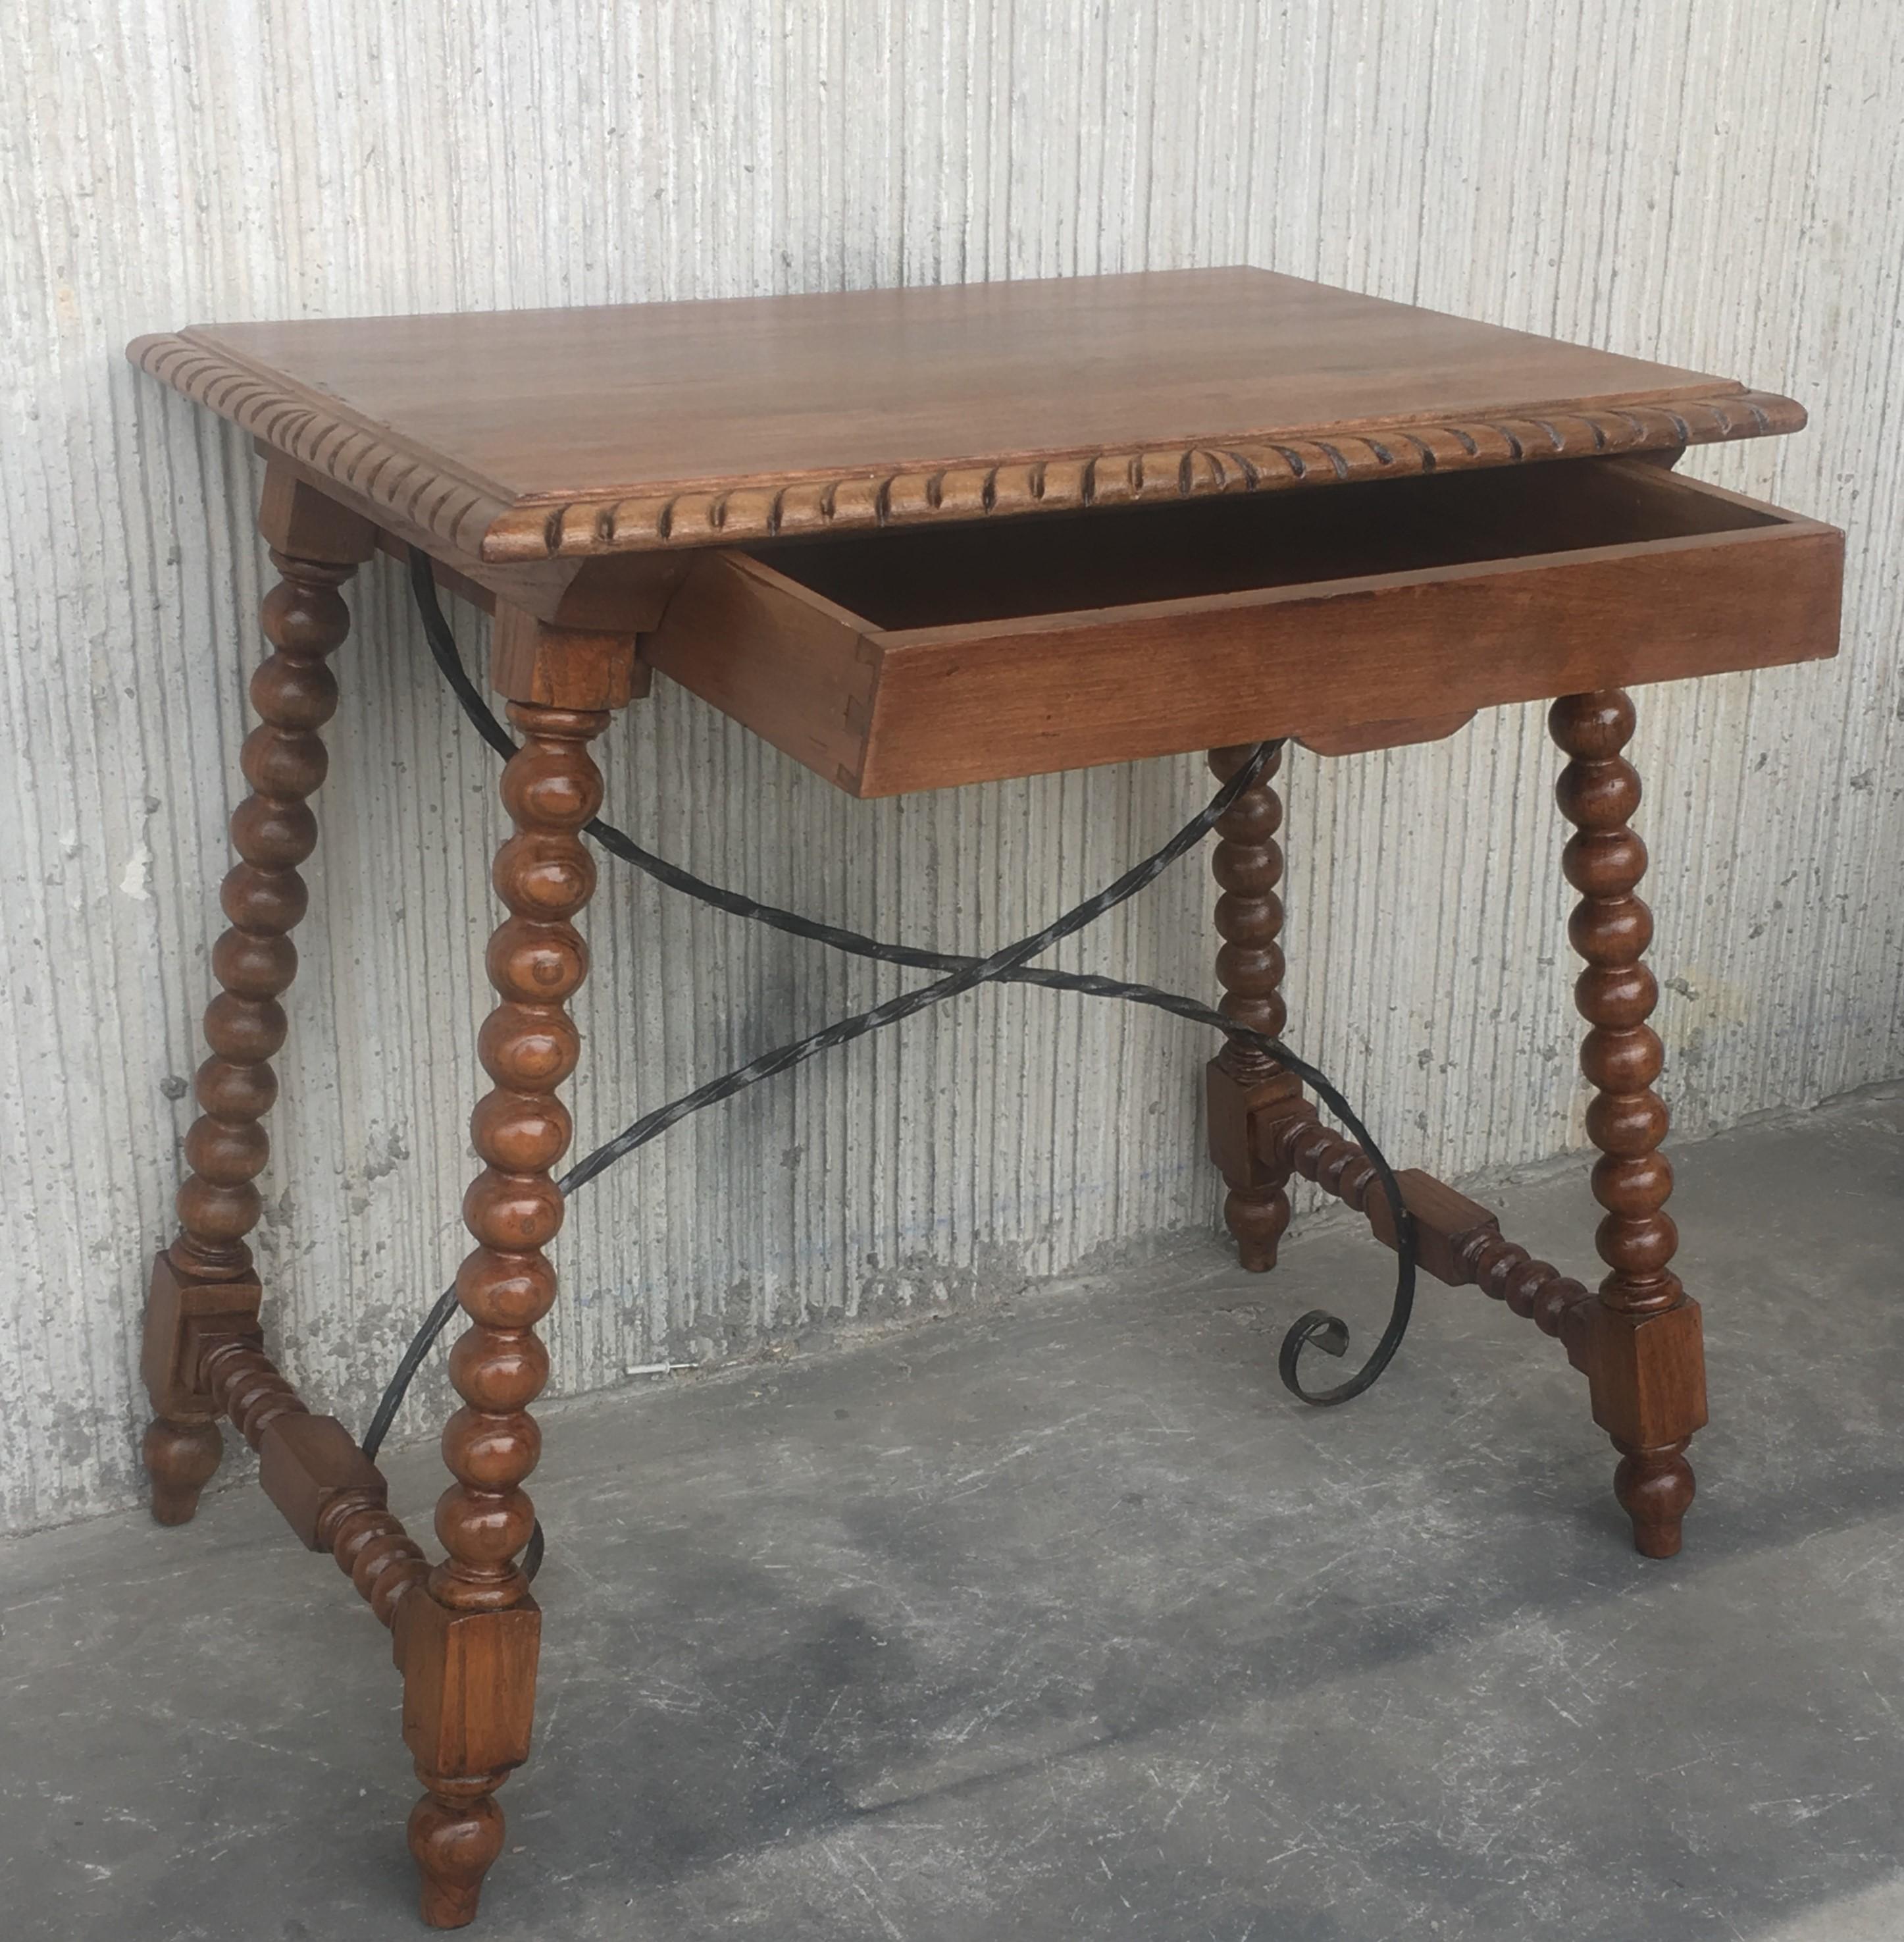 19th century Spanish farm table with iron stretchers, hand carved top and drawer.

An unusual form with nice shiny patina. Nice size for a side or end table, or as a lamp table. Graceful carved supports with a shaped edge on the top. The single